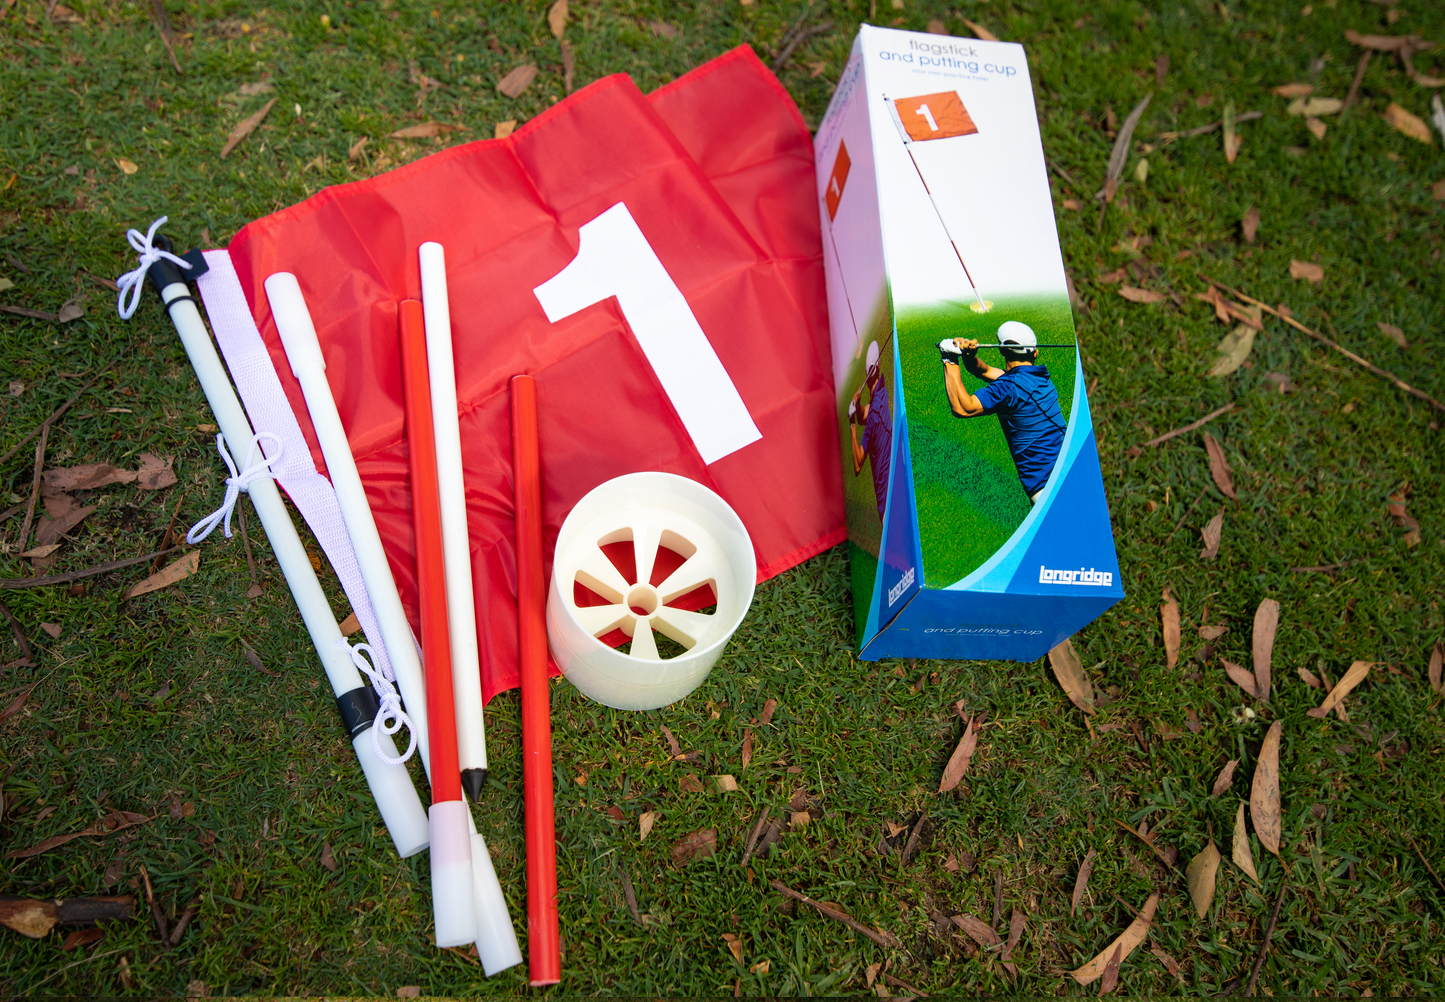 Flagstick & Putting Cup